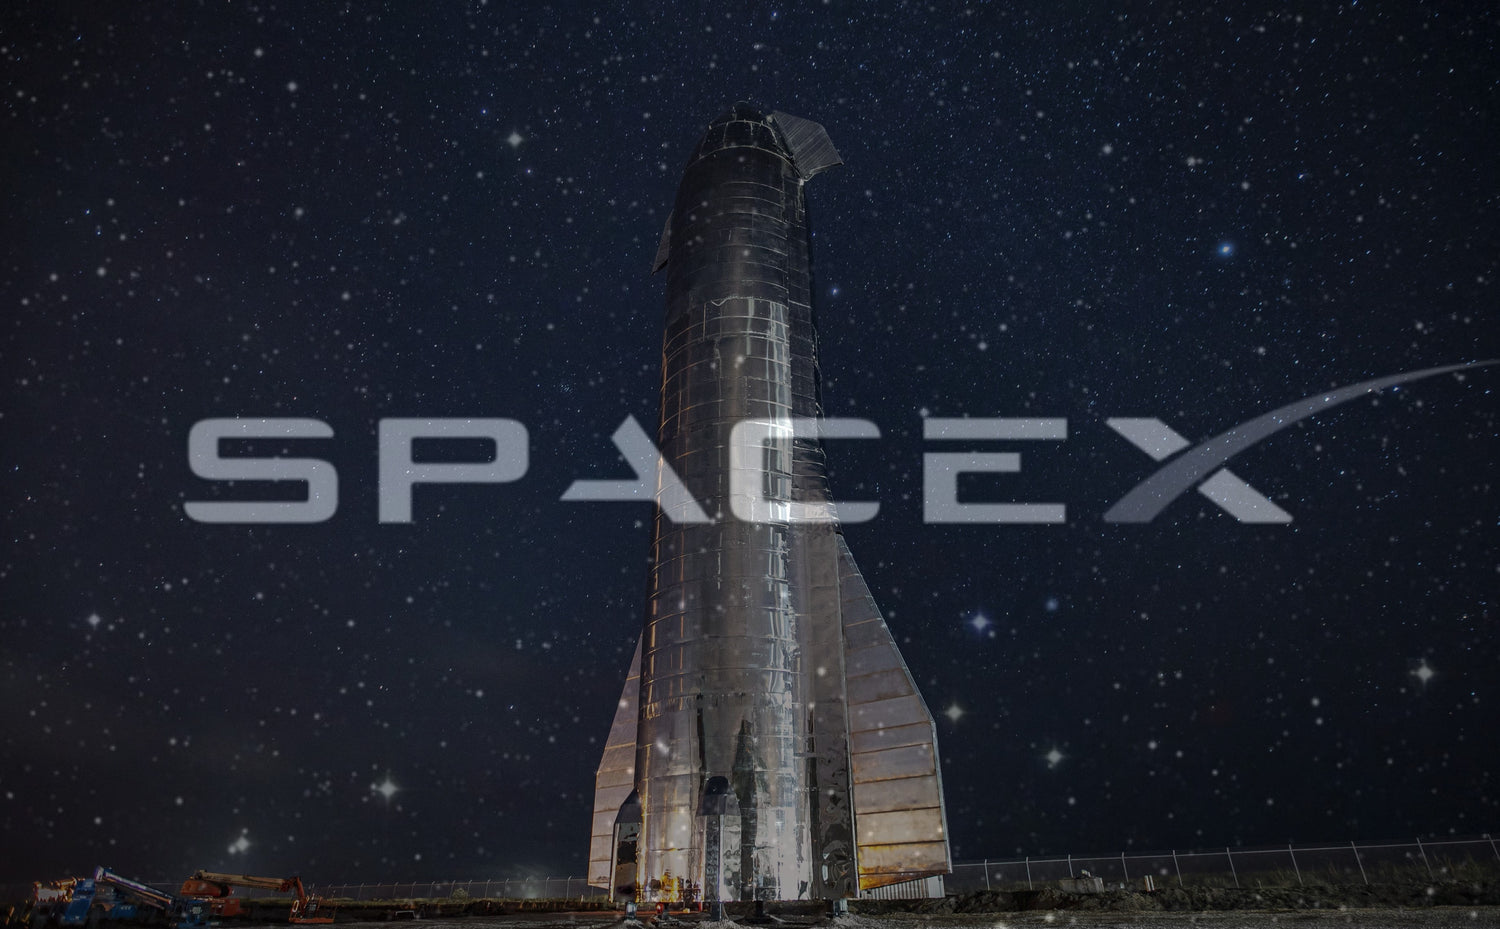 Elon Musk shared that SpaceX is now building the flight design version of Starship